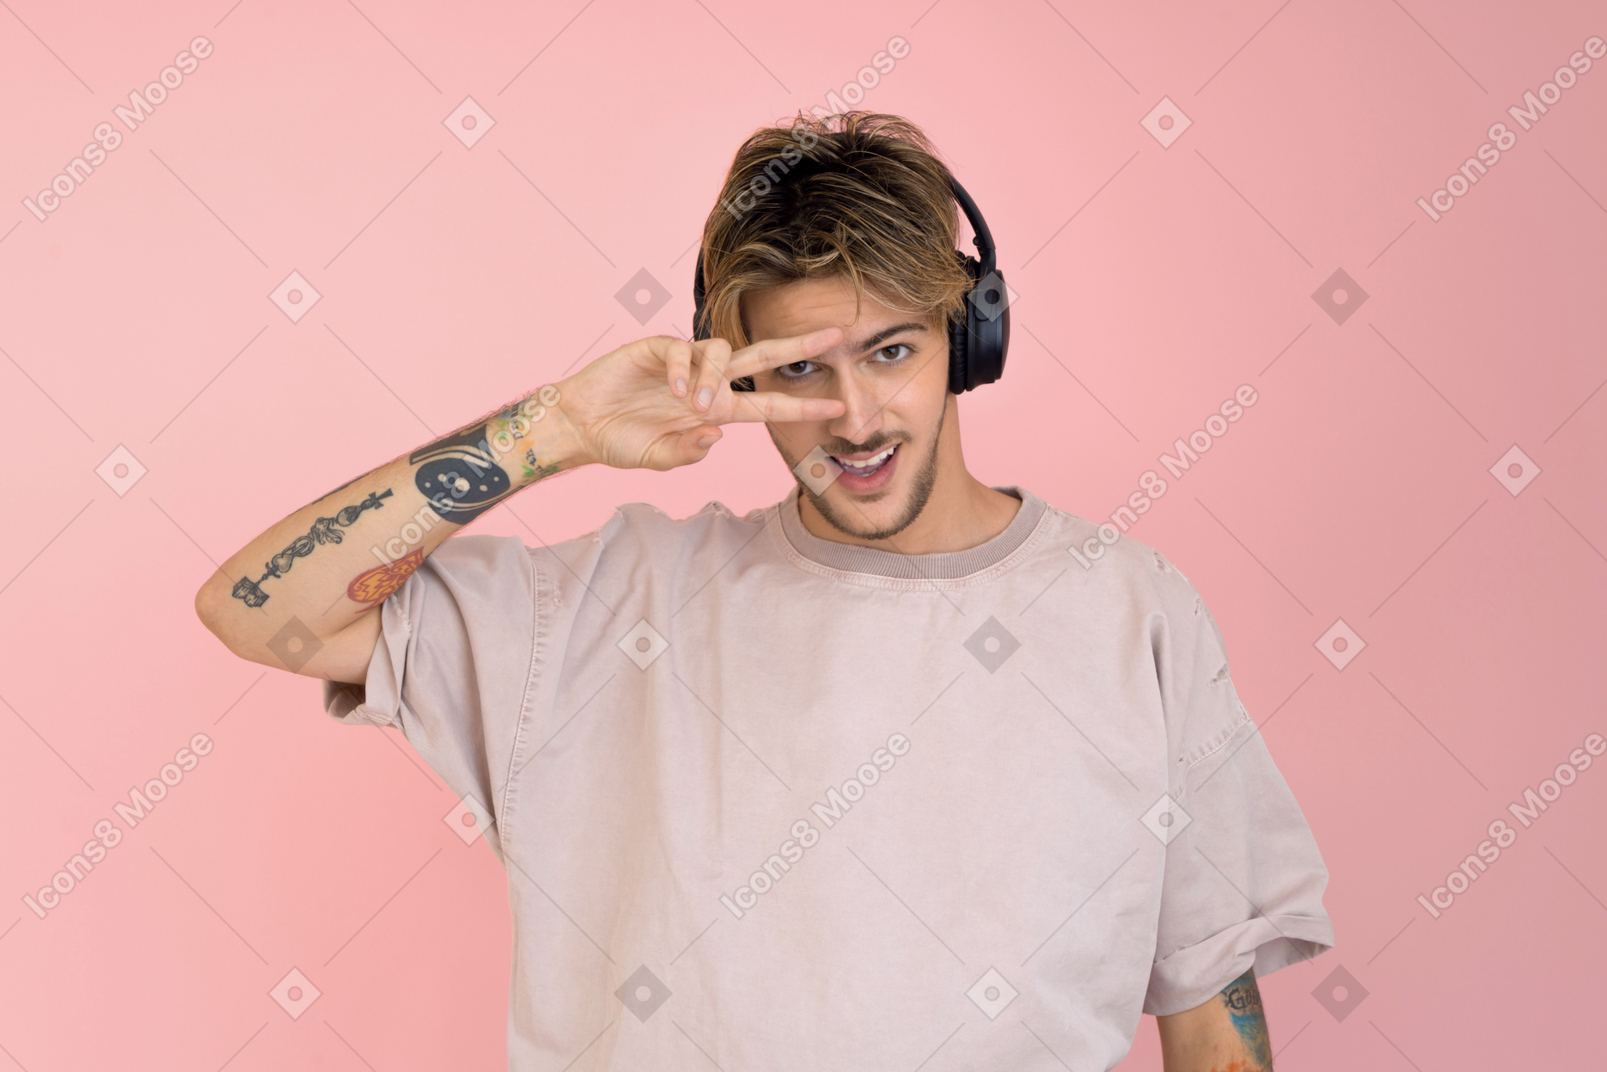 Young man in headphones showing v sign